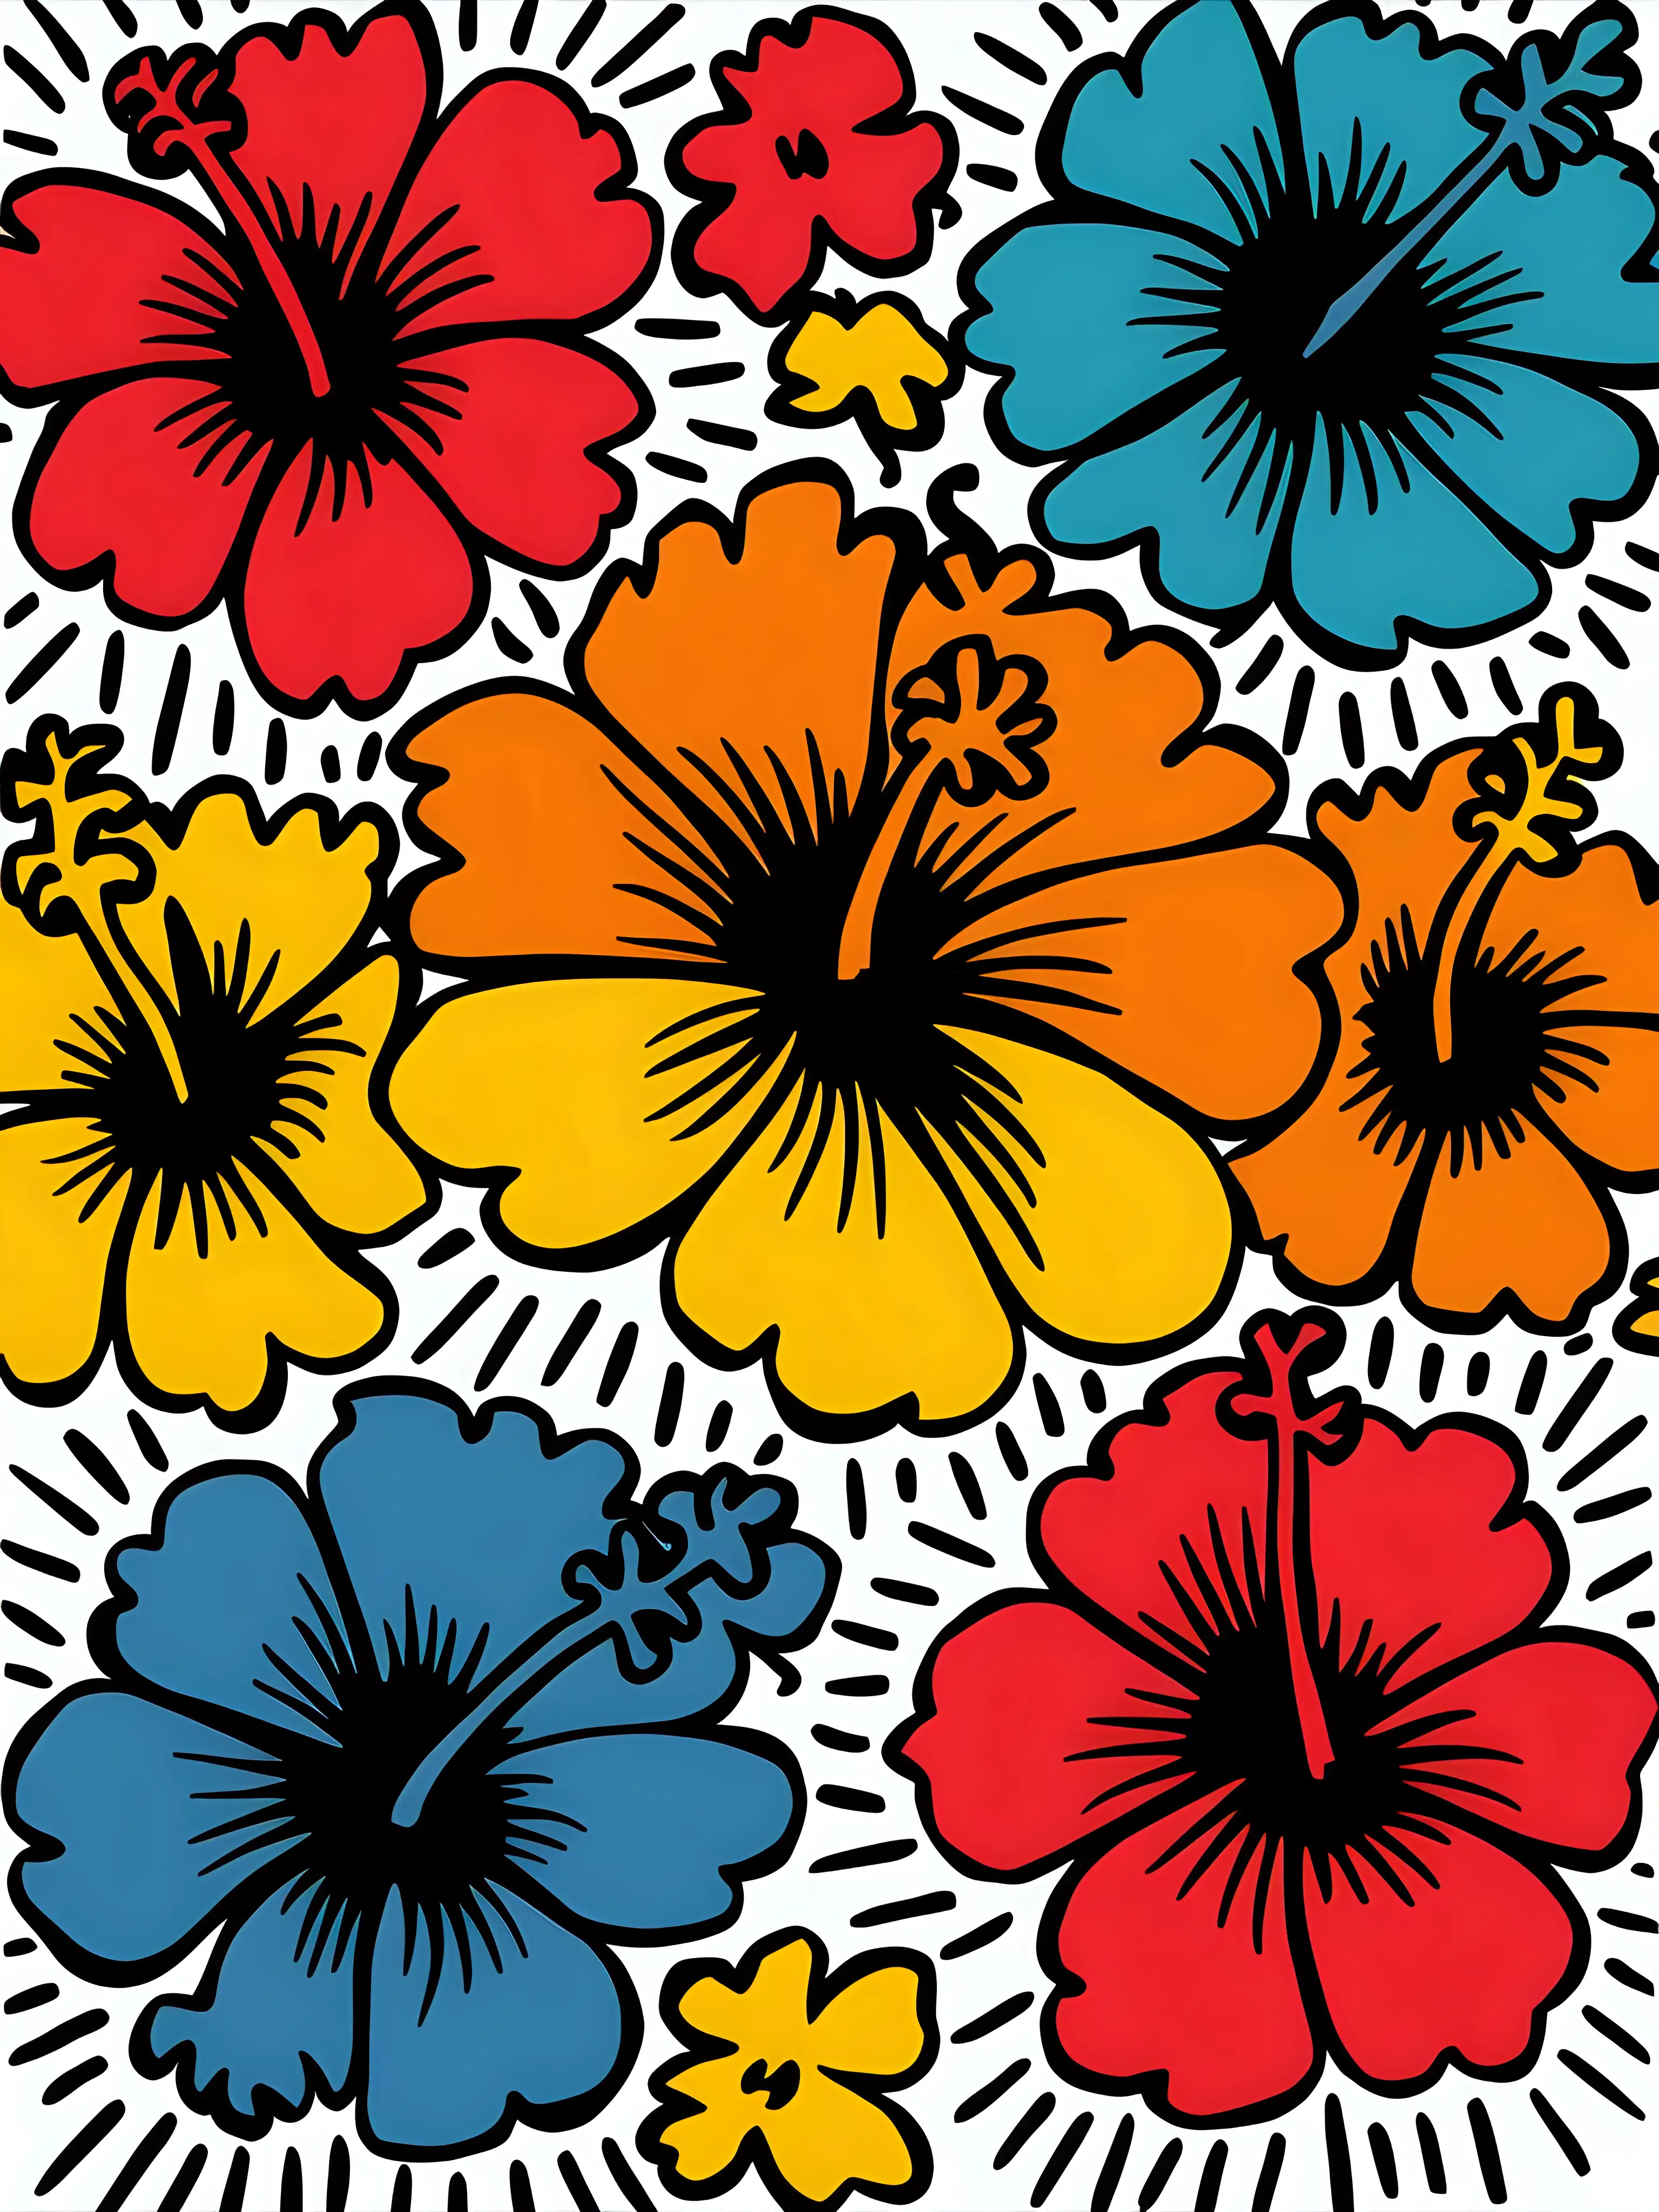 Pop Art Hibiscus Flower Illustration with Keith Haring Influence